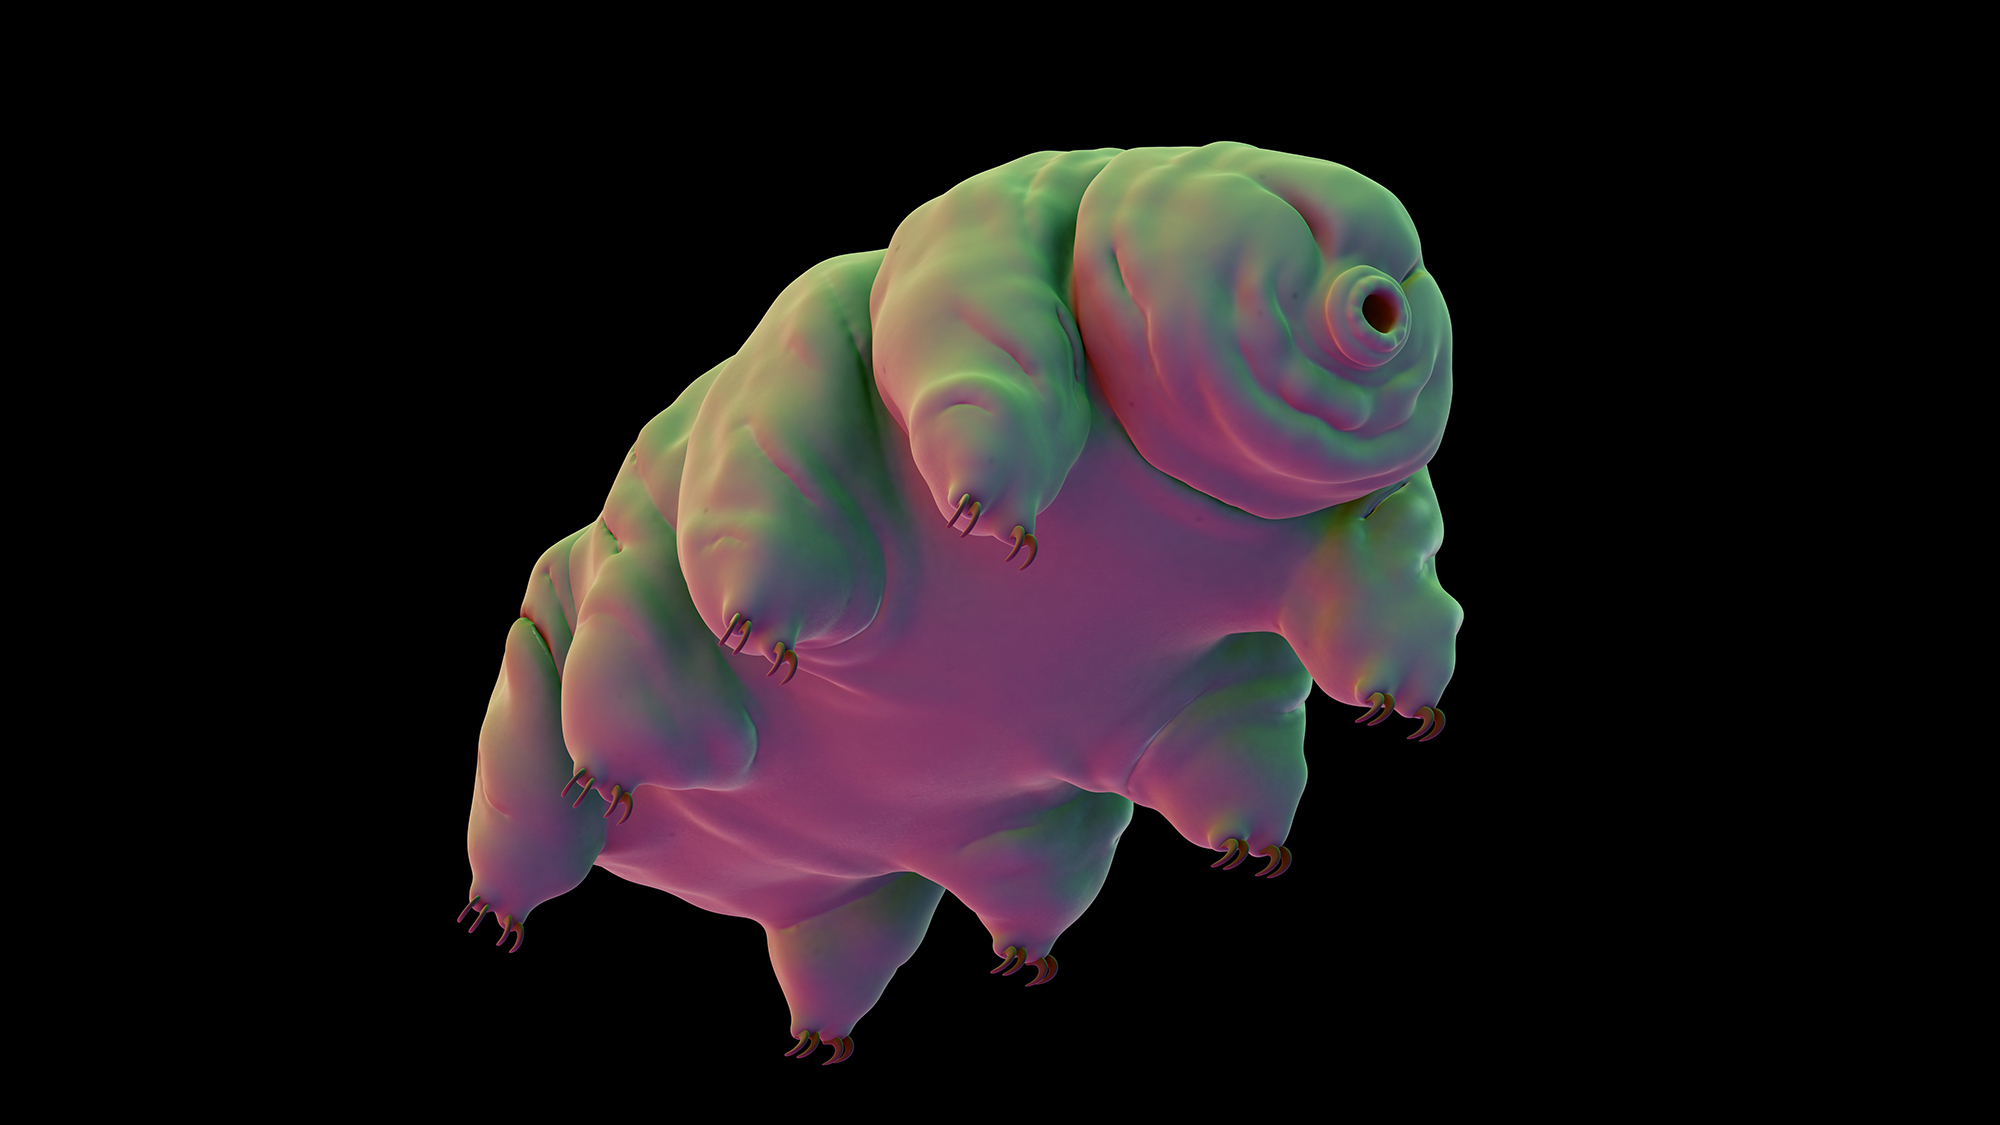 a tardigrade. these microscopic animals have right legs and round bear-like bodies with a small pointy appendage in front.